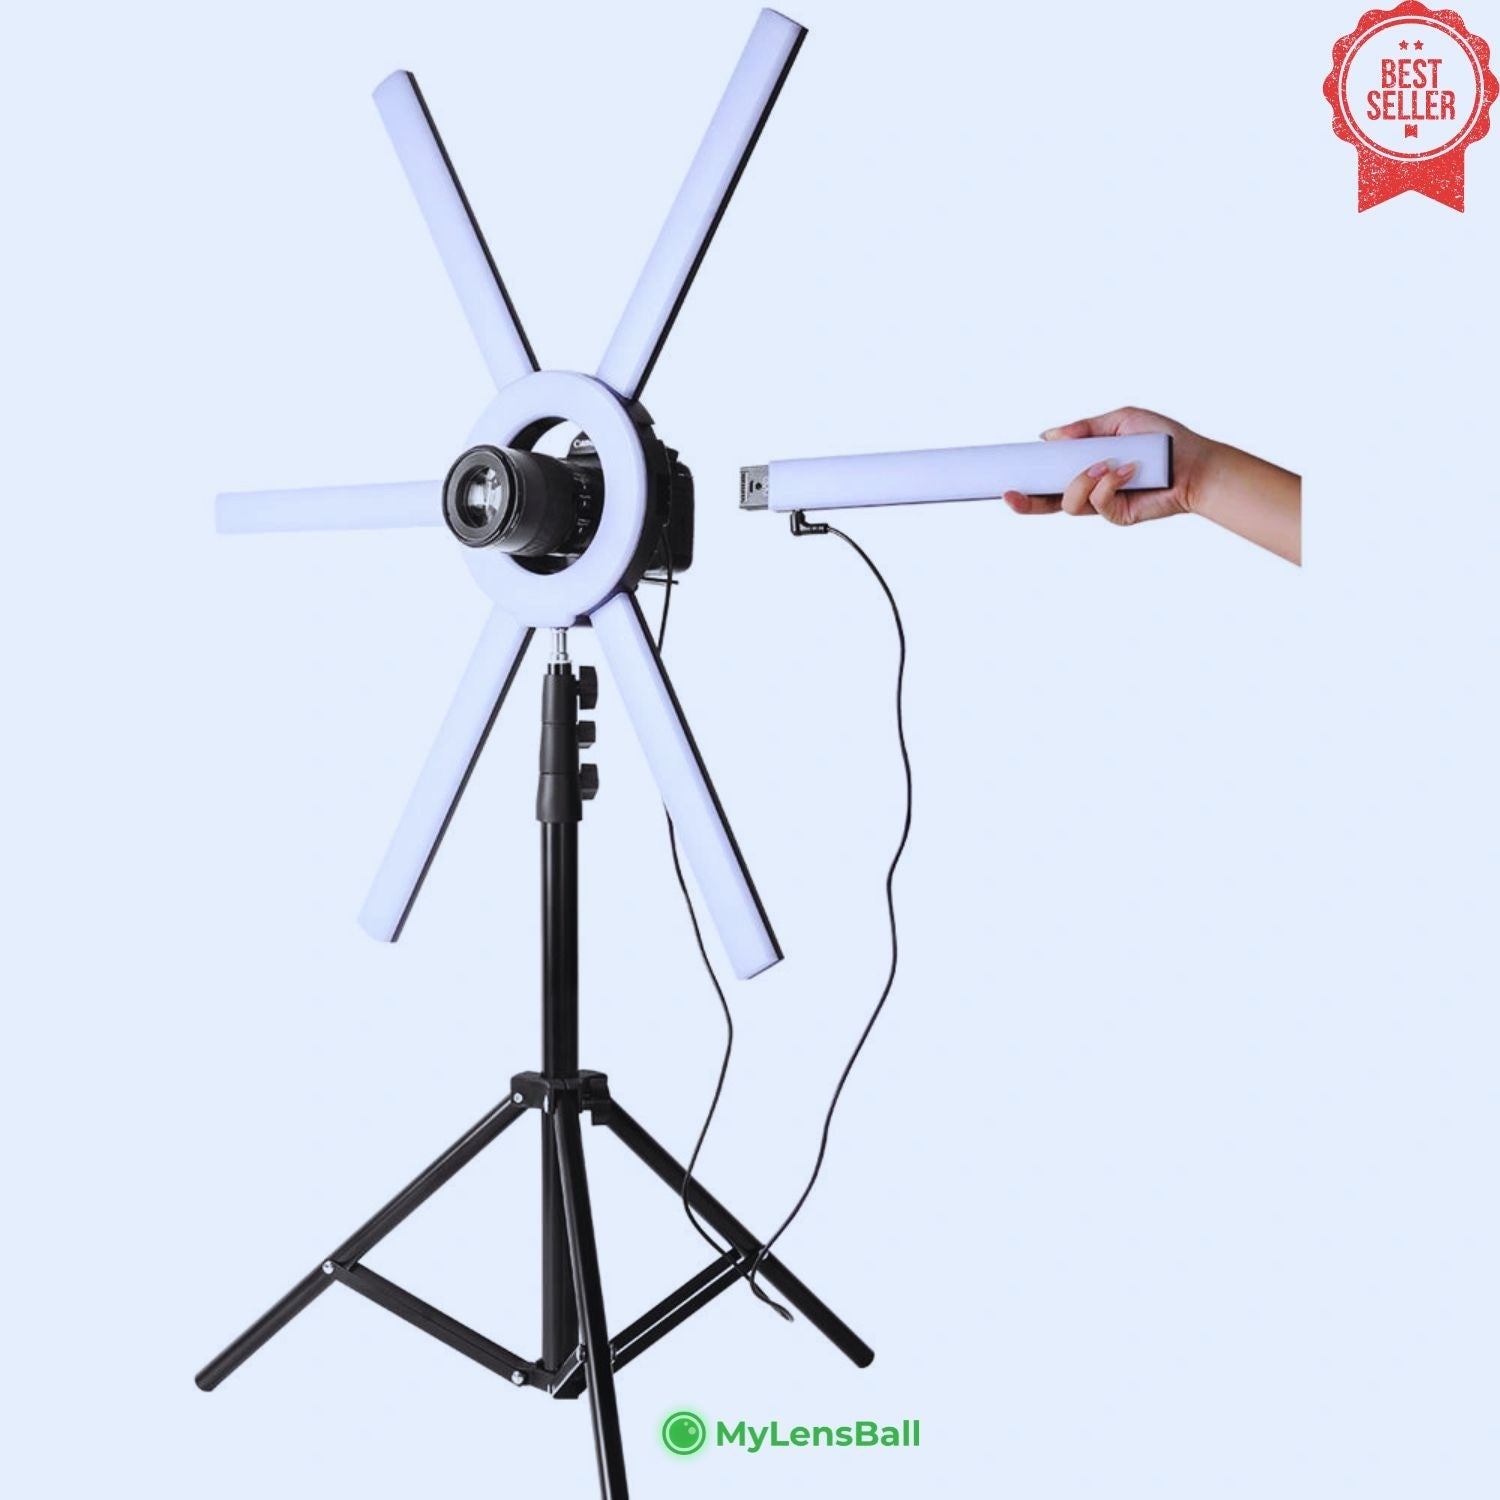 GVM 600S Led Video Lighting Kit, 90W Dimmable Bi-Color LED Ring Light with Stand - mylensball.com.au